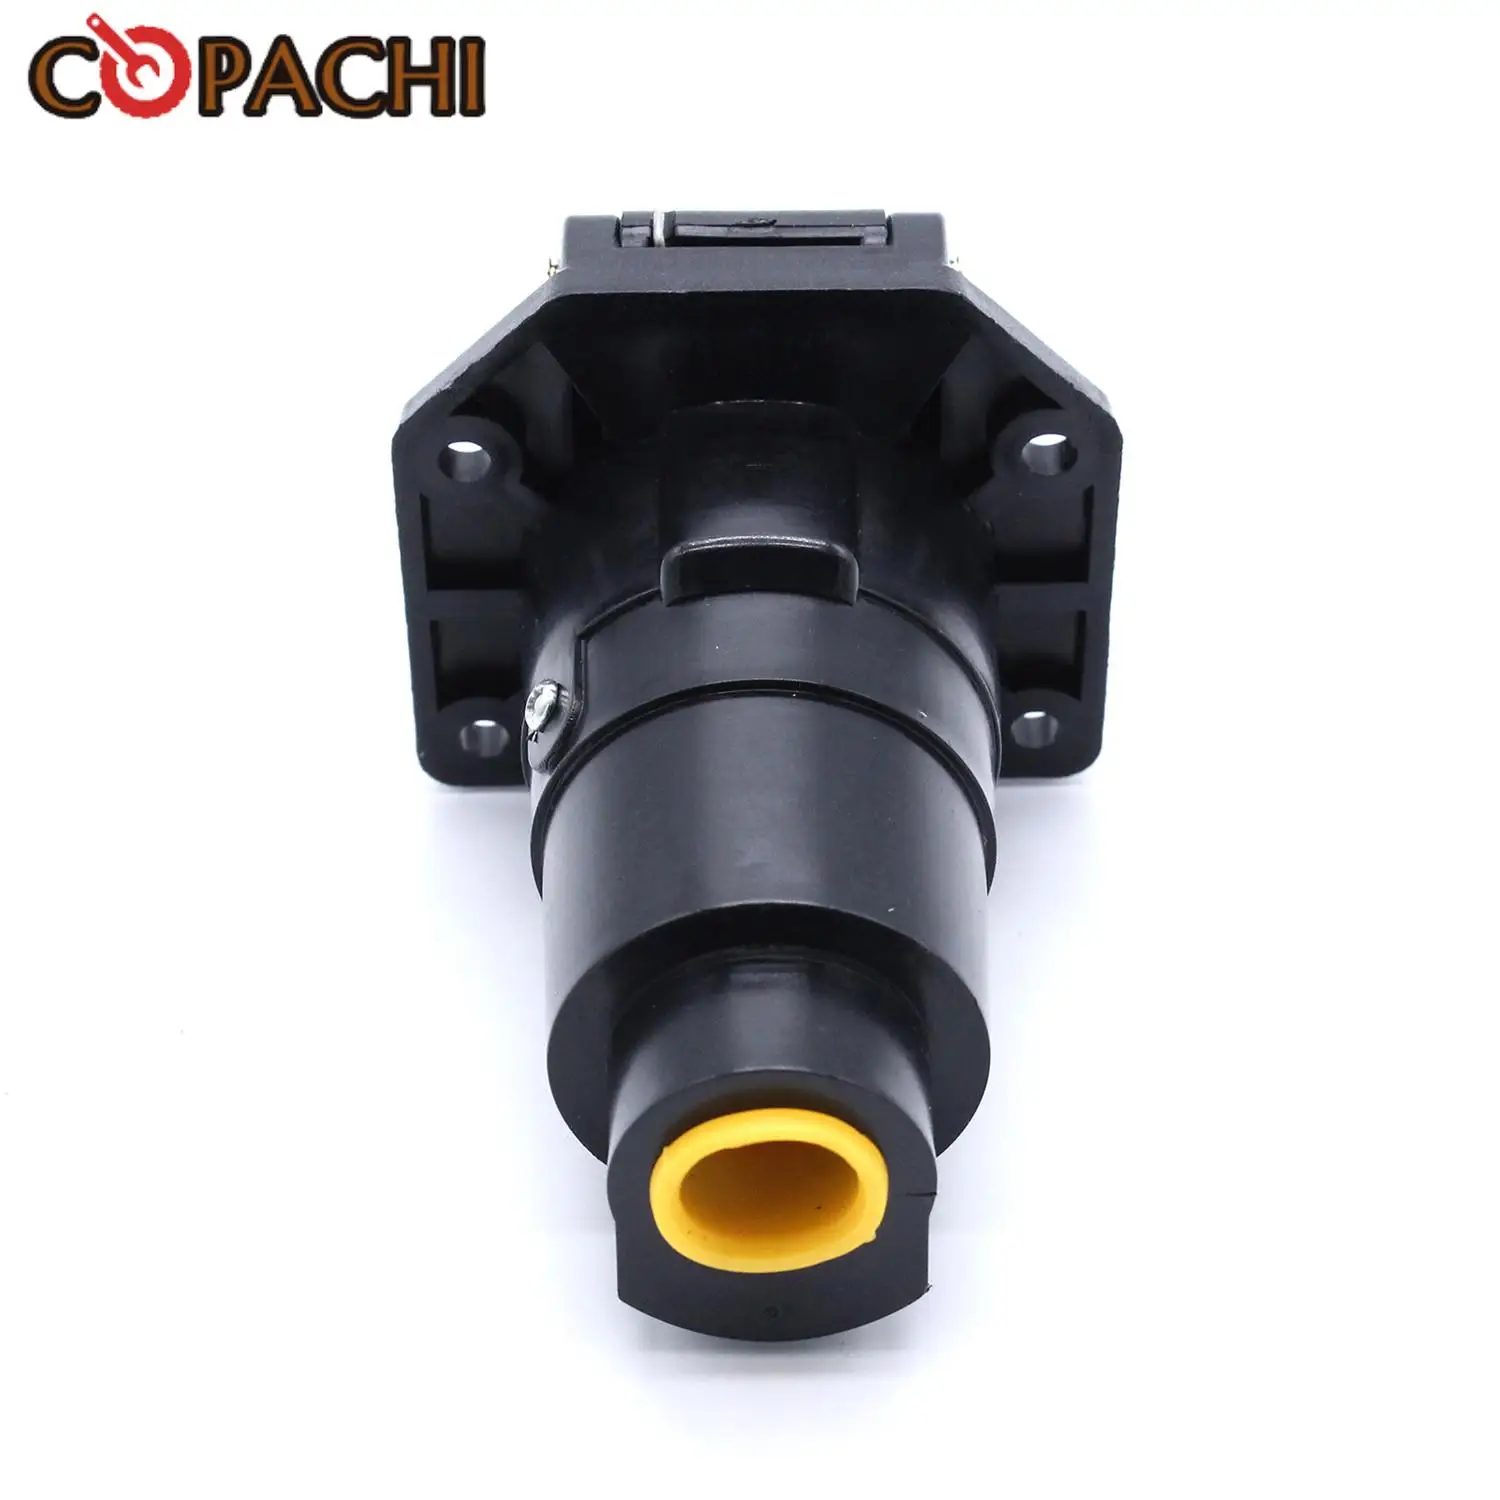 

12V 7 Pin Round Trailer Plug 7 Way Socket Adapter Wiring Connector for American With 3 Months Warranty